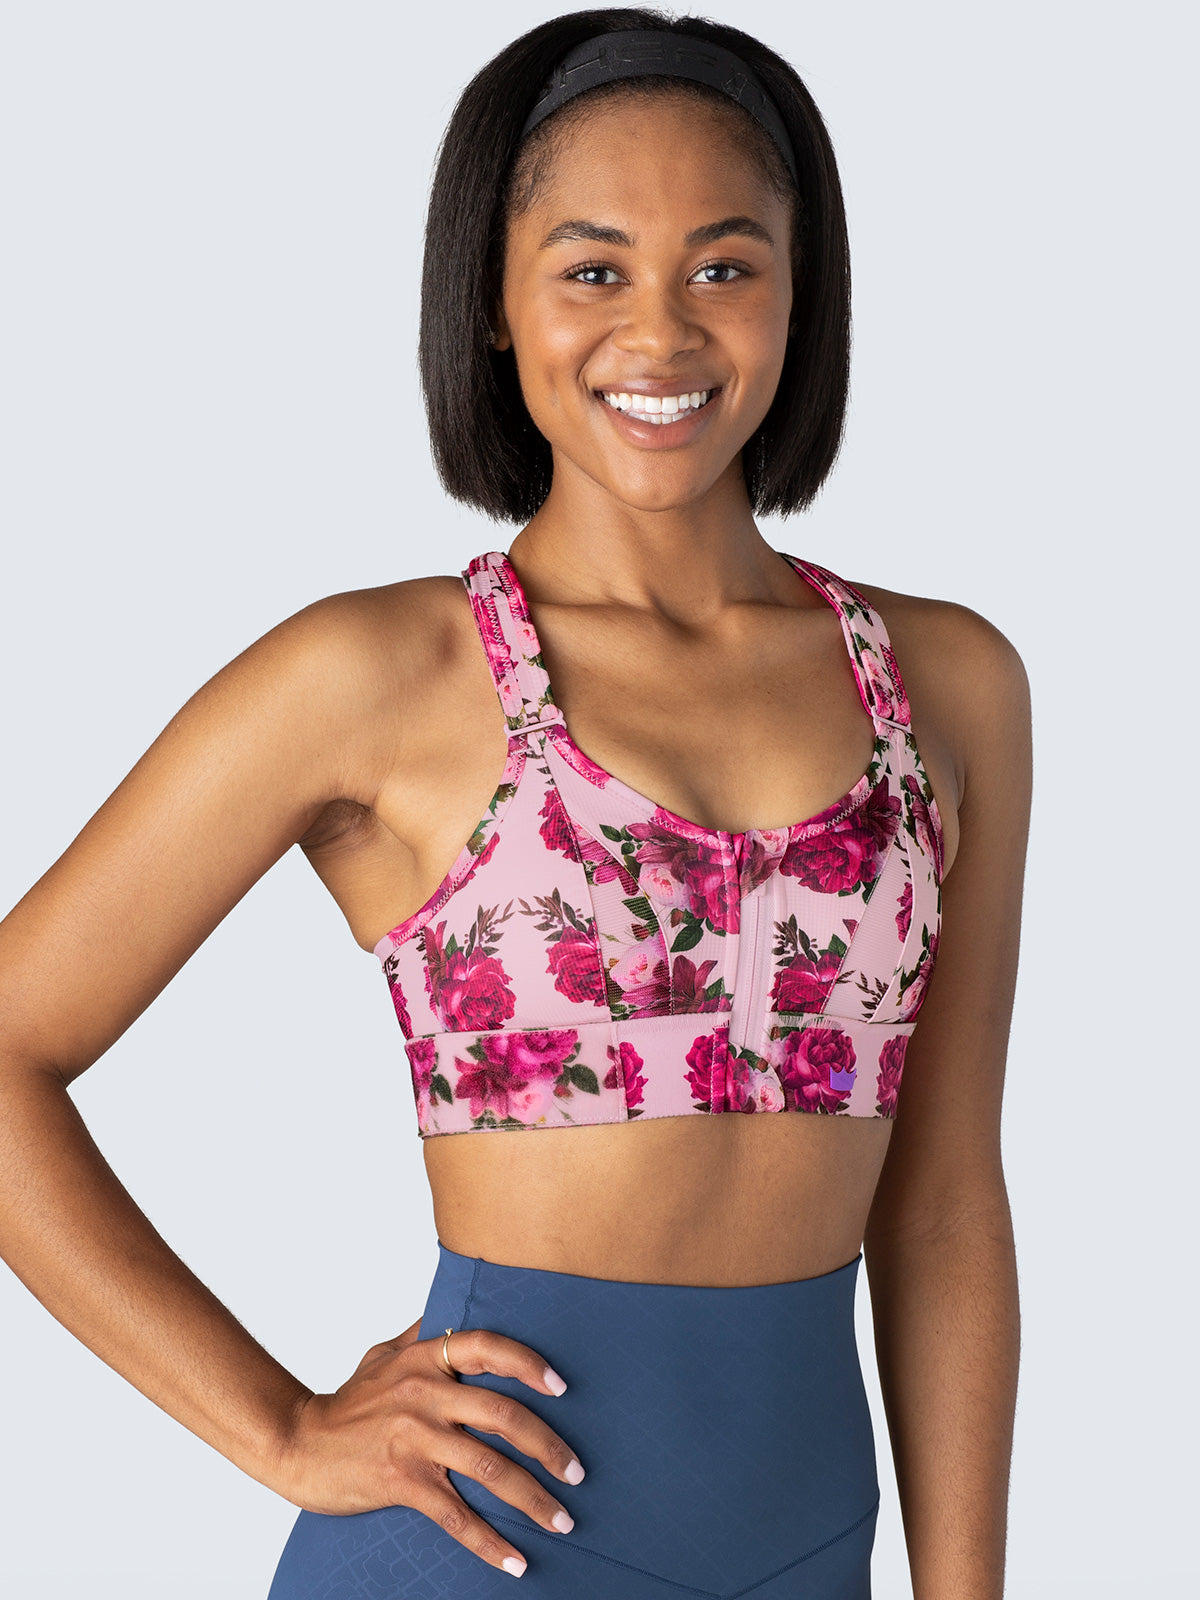 Cora Harrington on X: Have you tried the Shefit sports bra? We have  someopinions.   / X